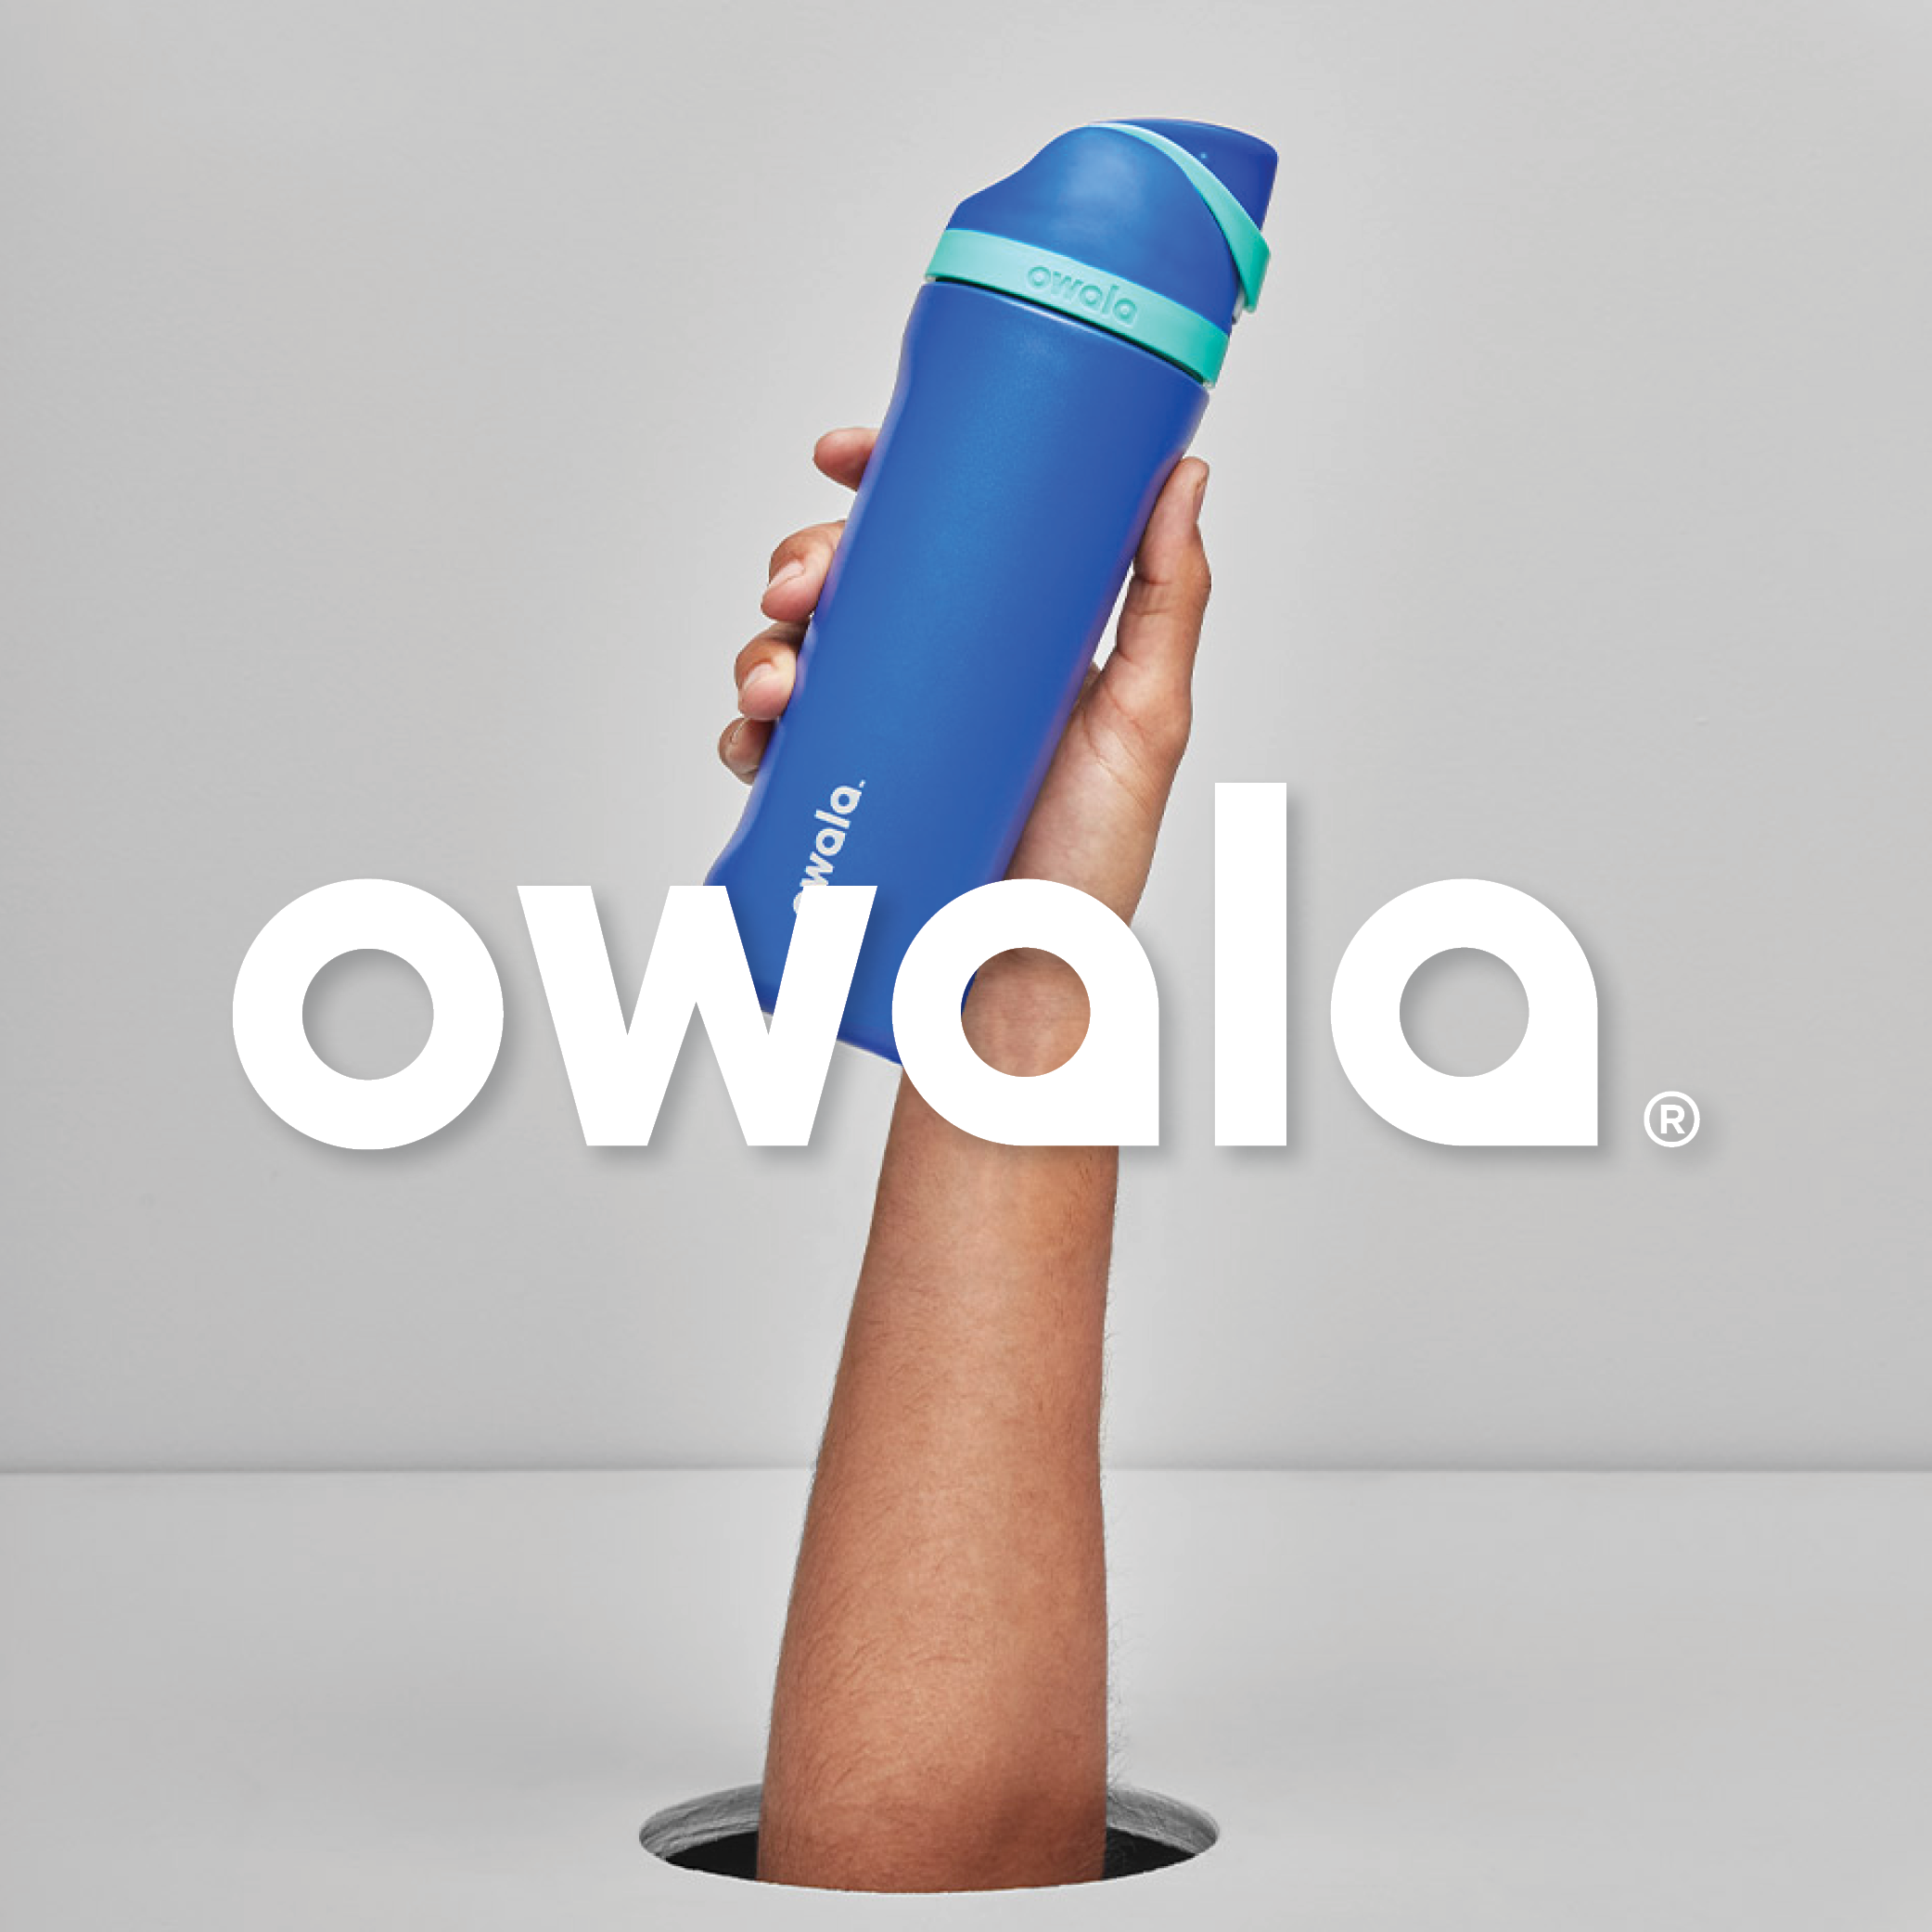 Find the best deals Shop today for Owala Freesip 24oz - Tide Me Over owala